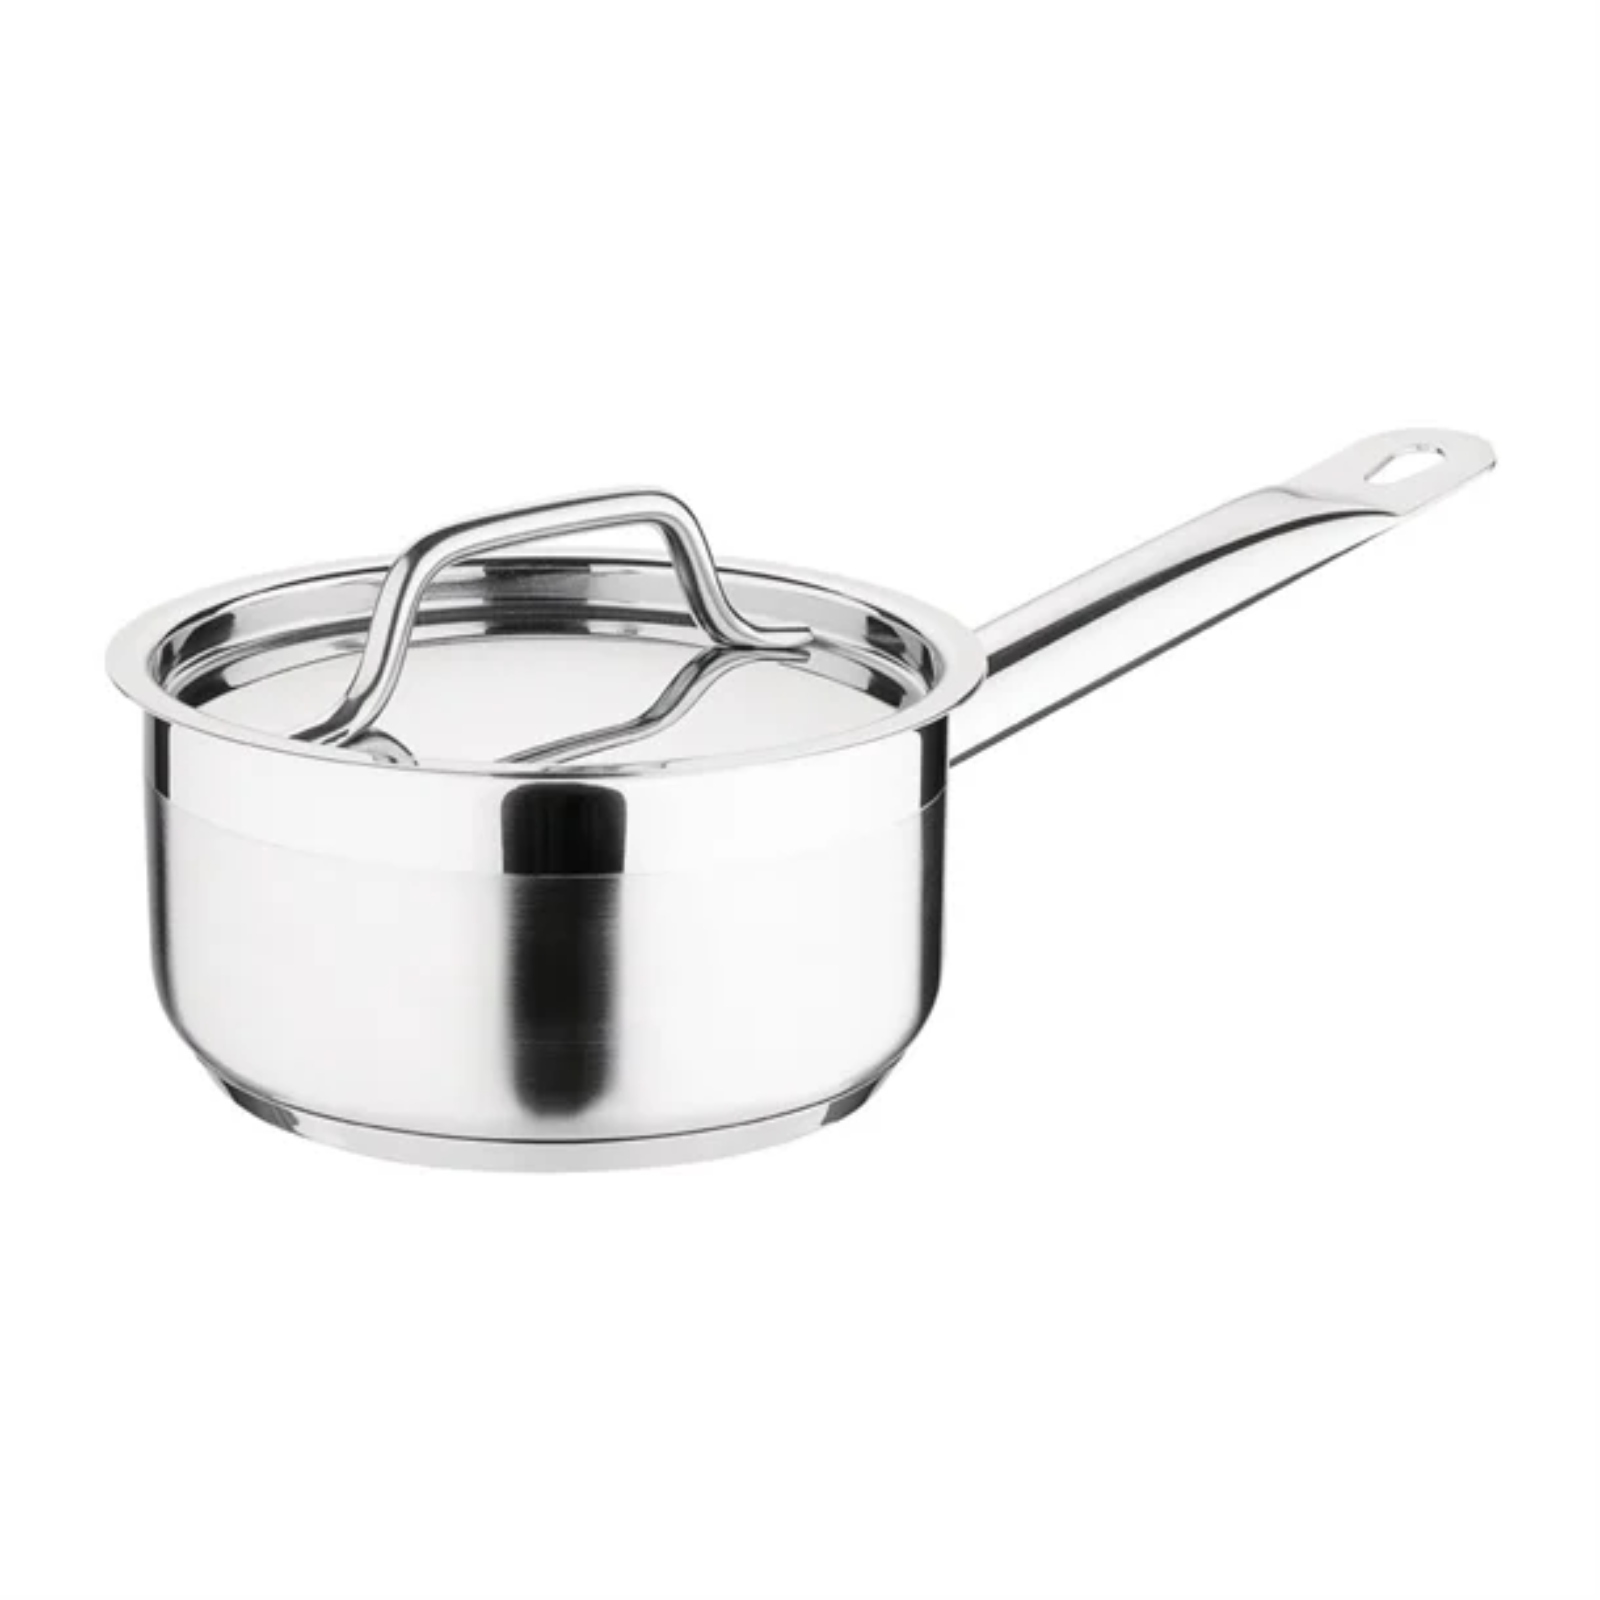 Nisbets Essentials Saucepan With Lid 14cm Stainless Steel